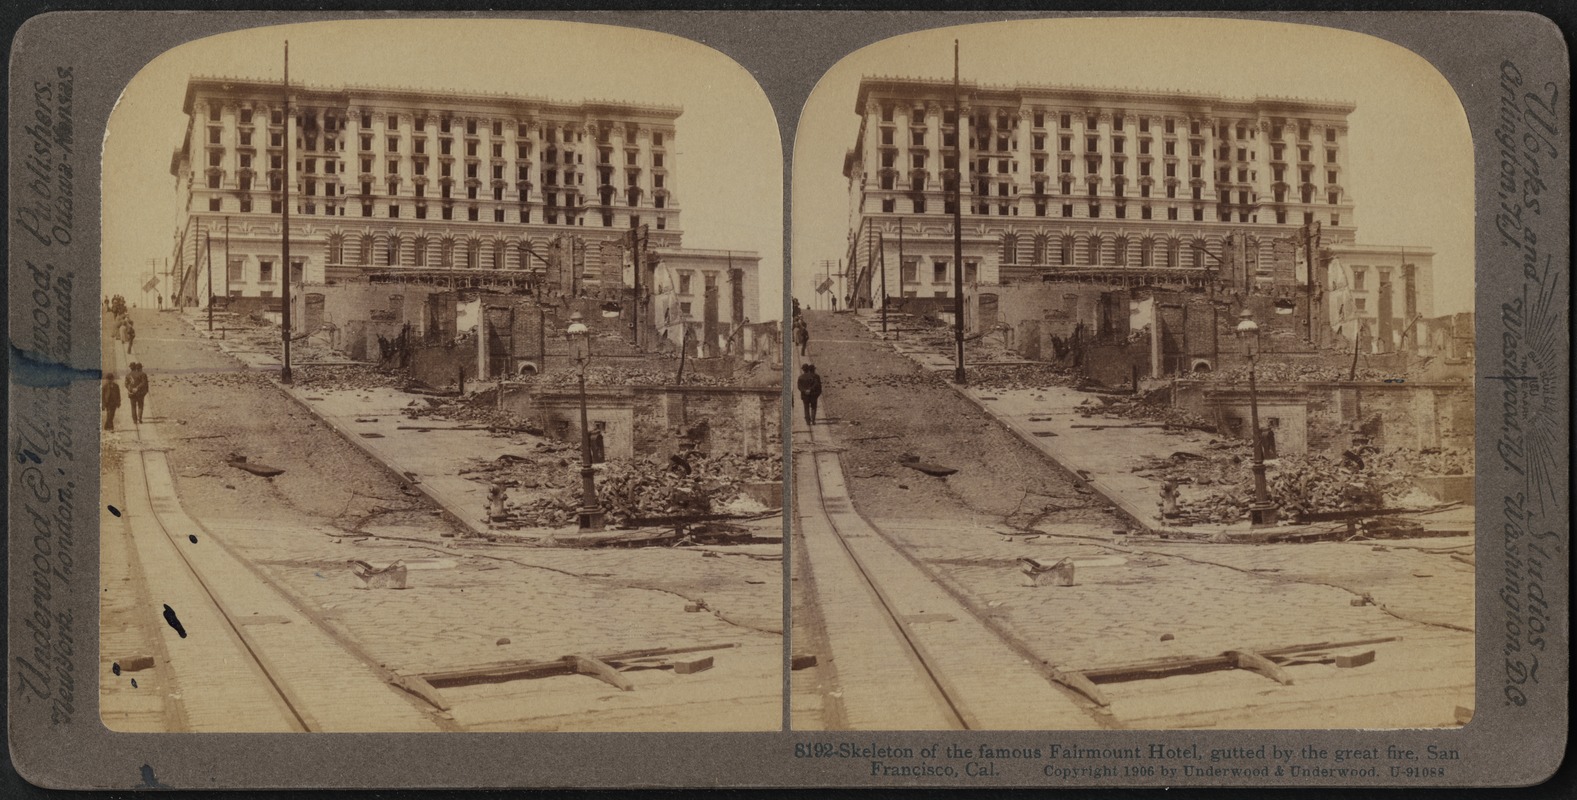 Skeleton of the famous Fairmount Hotel, gutted by the great fire, San Francisco, Cal.